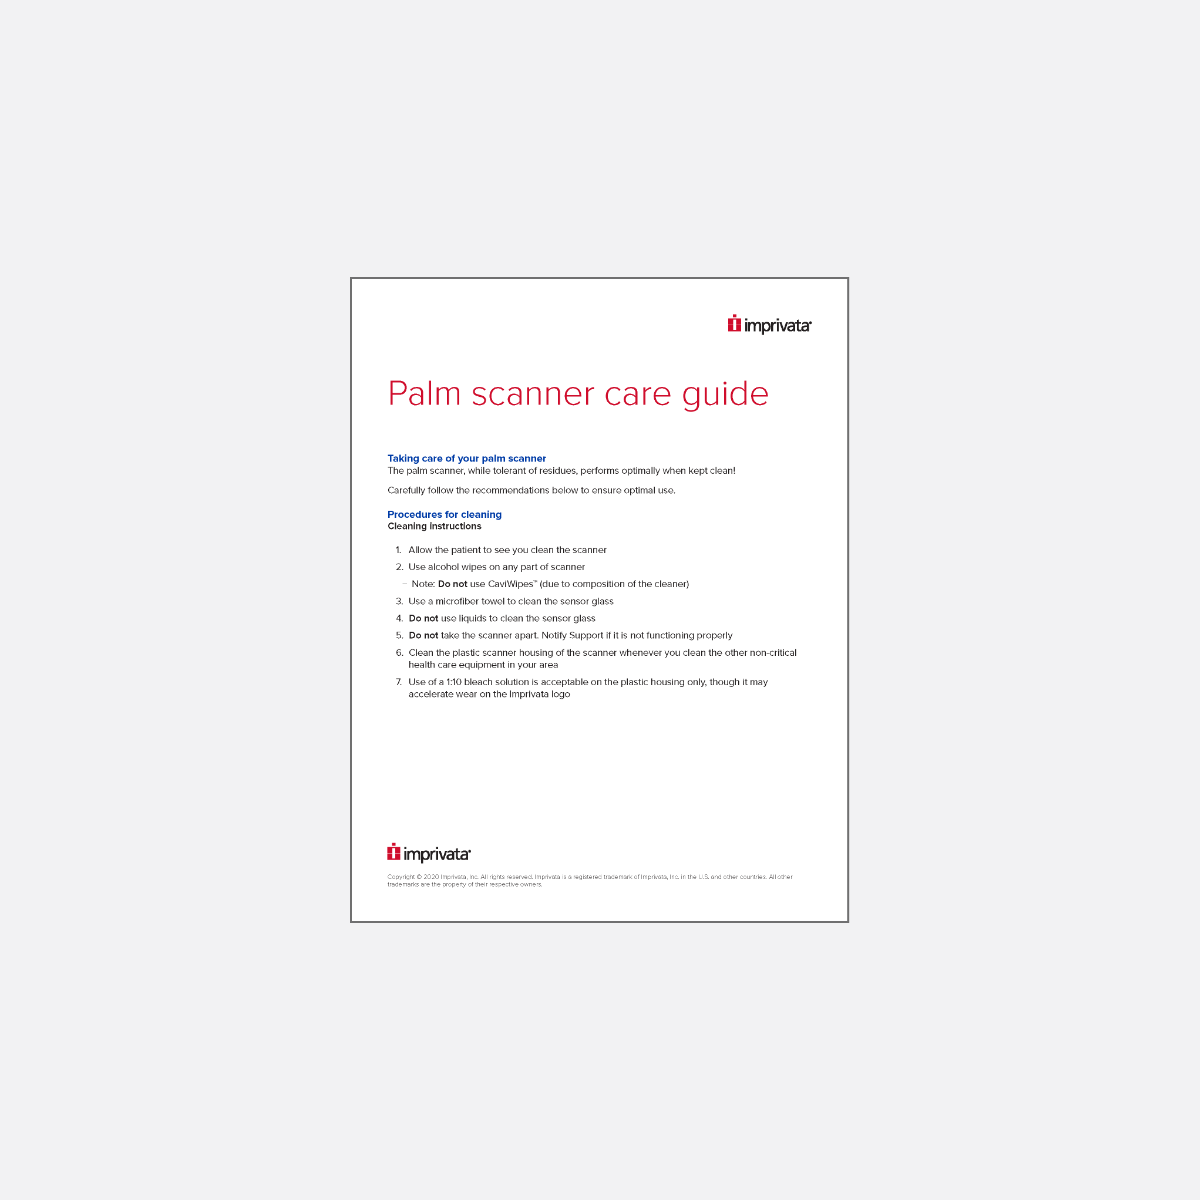 Image of palm scanner care guide